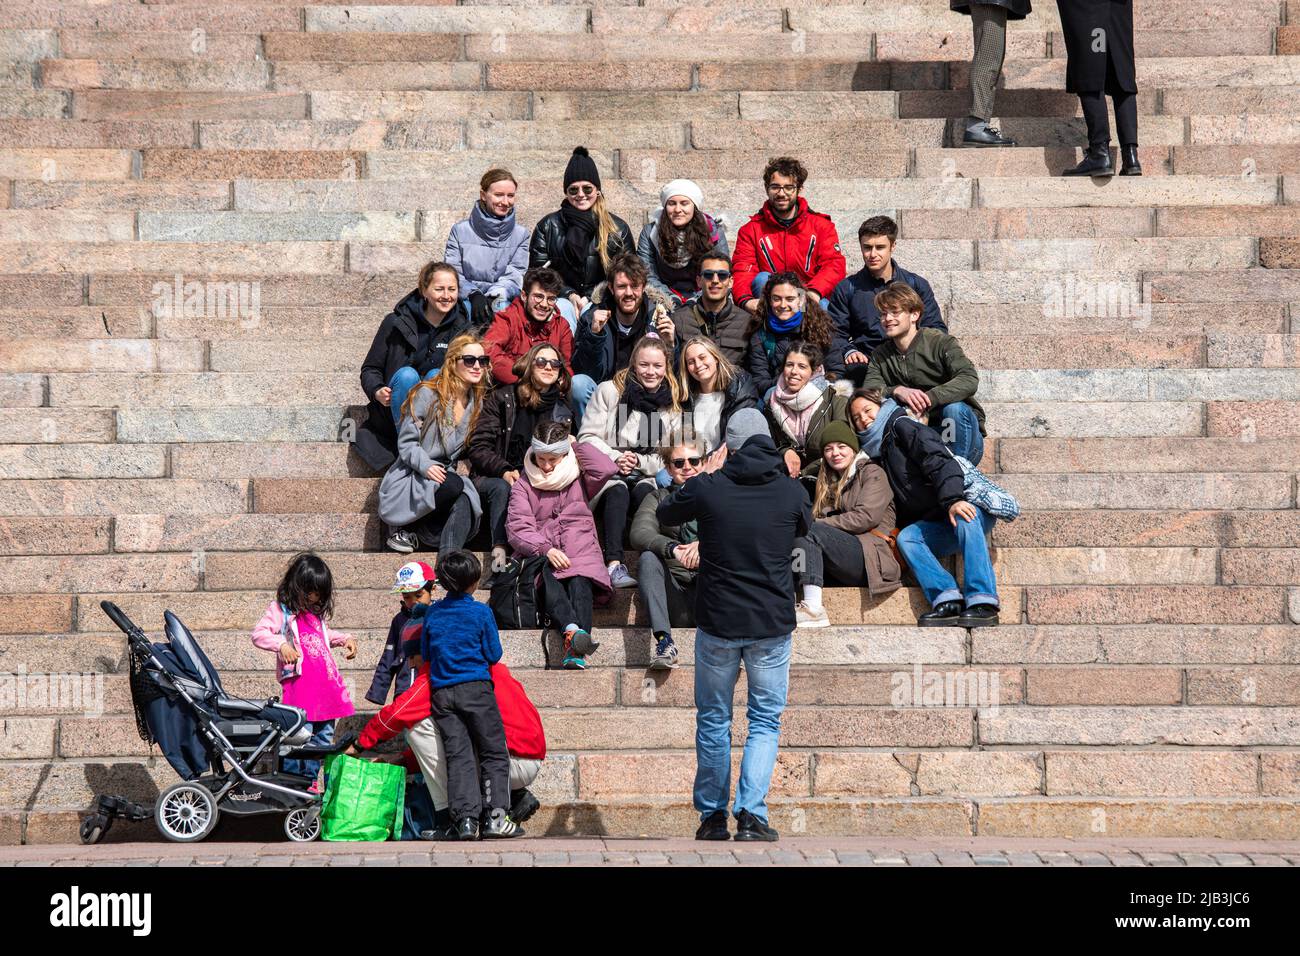 Group of young people posing for a photo on Helsinki Cathedral steps in Helsinki, Finland Stock Photo